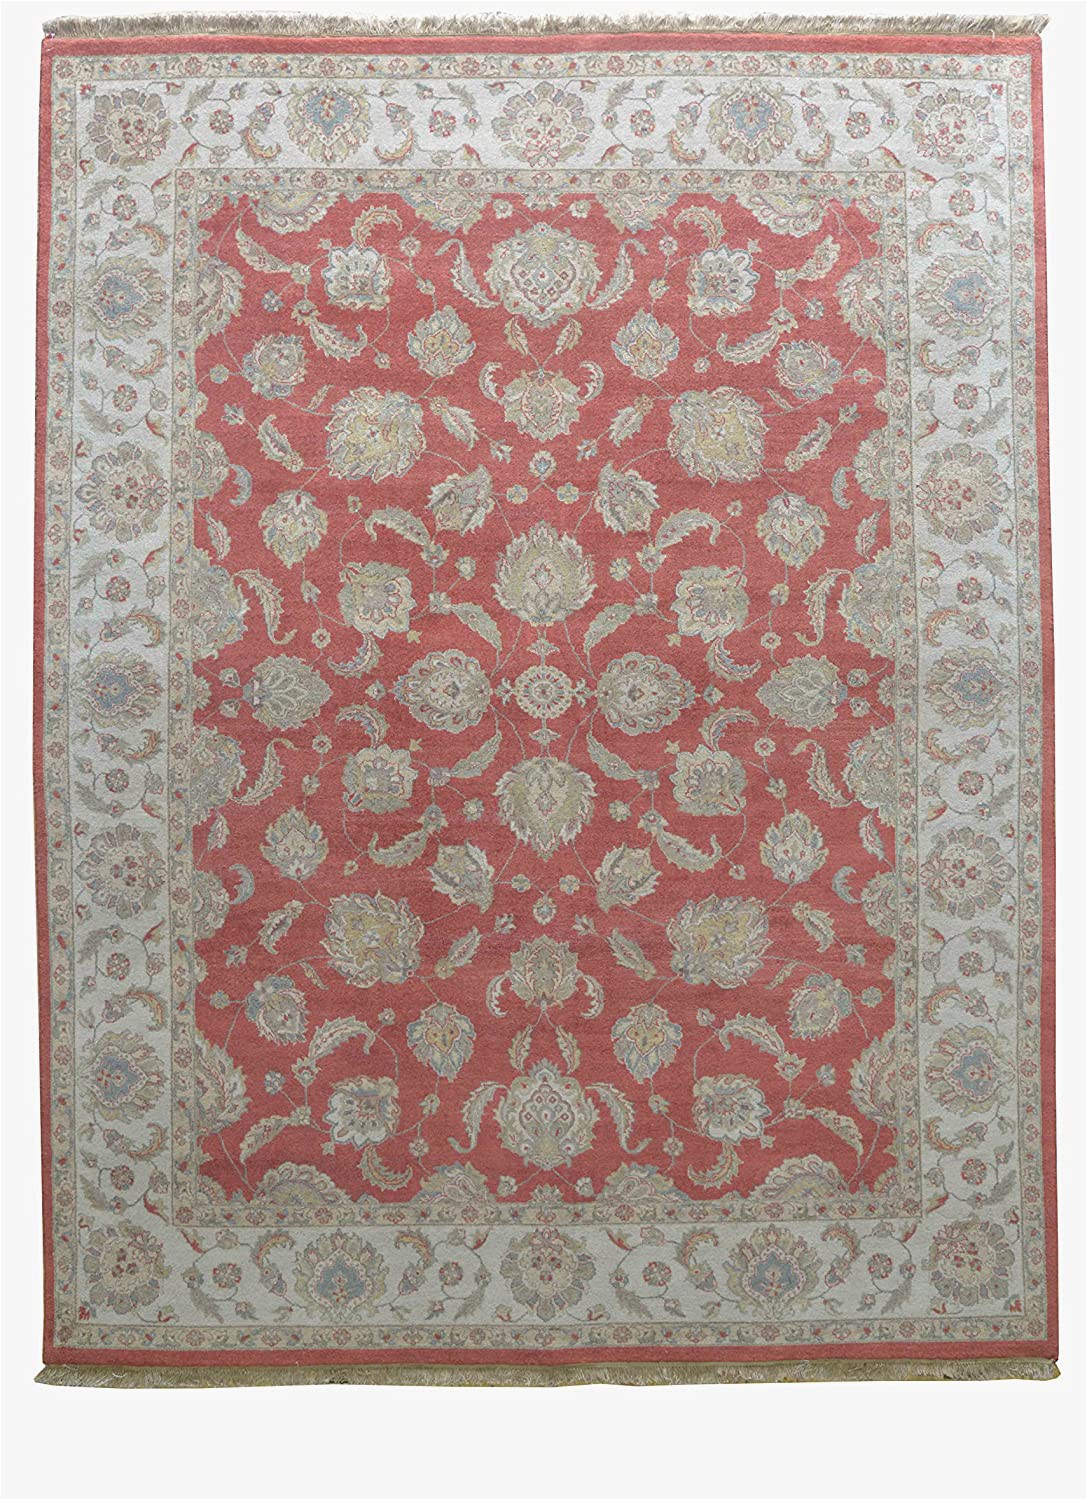 10 Feet by 12 Feet area Rugs Merorug Hand Knotted Nepalese Rug 9 X 12 Rust Color 9 Feet